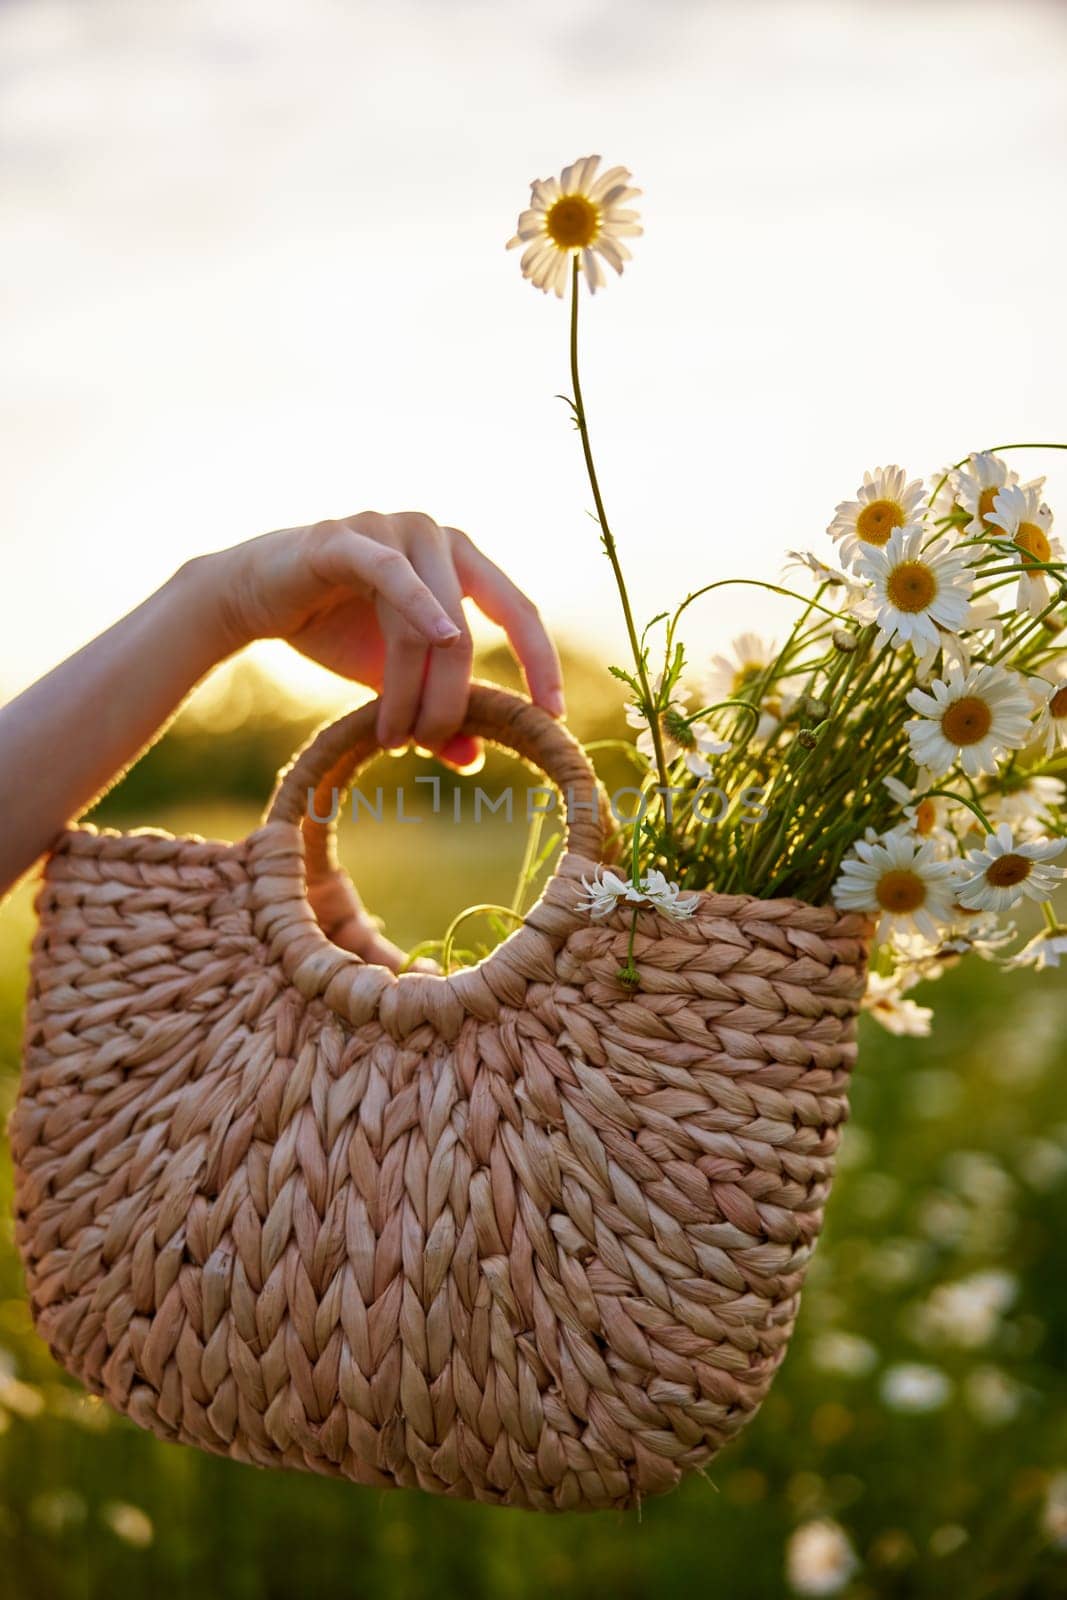 a woman holds a wicker basket with daisies in her hand against the sunset sky by Vichizh